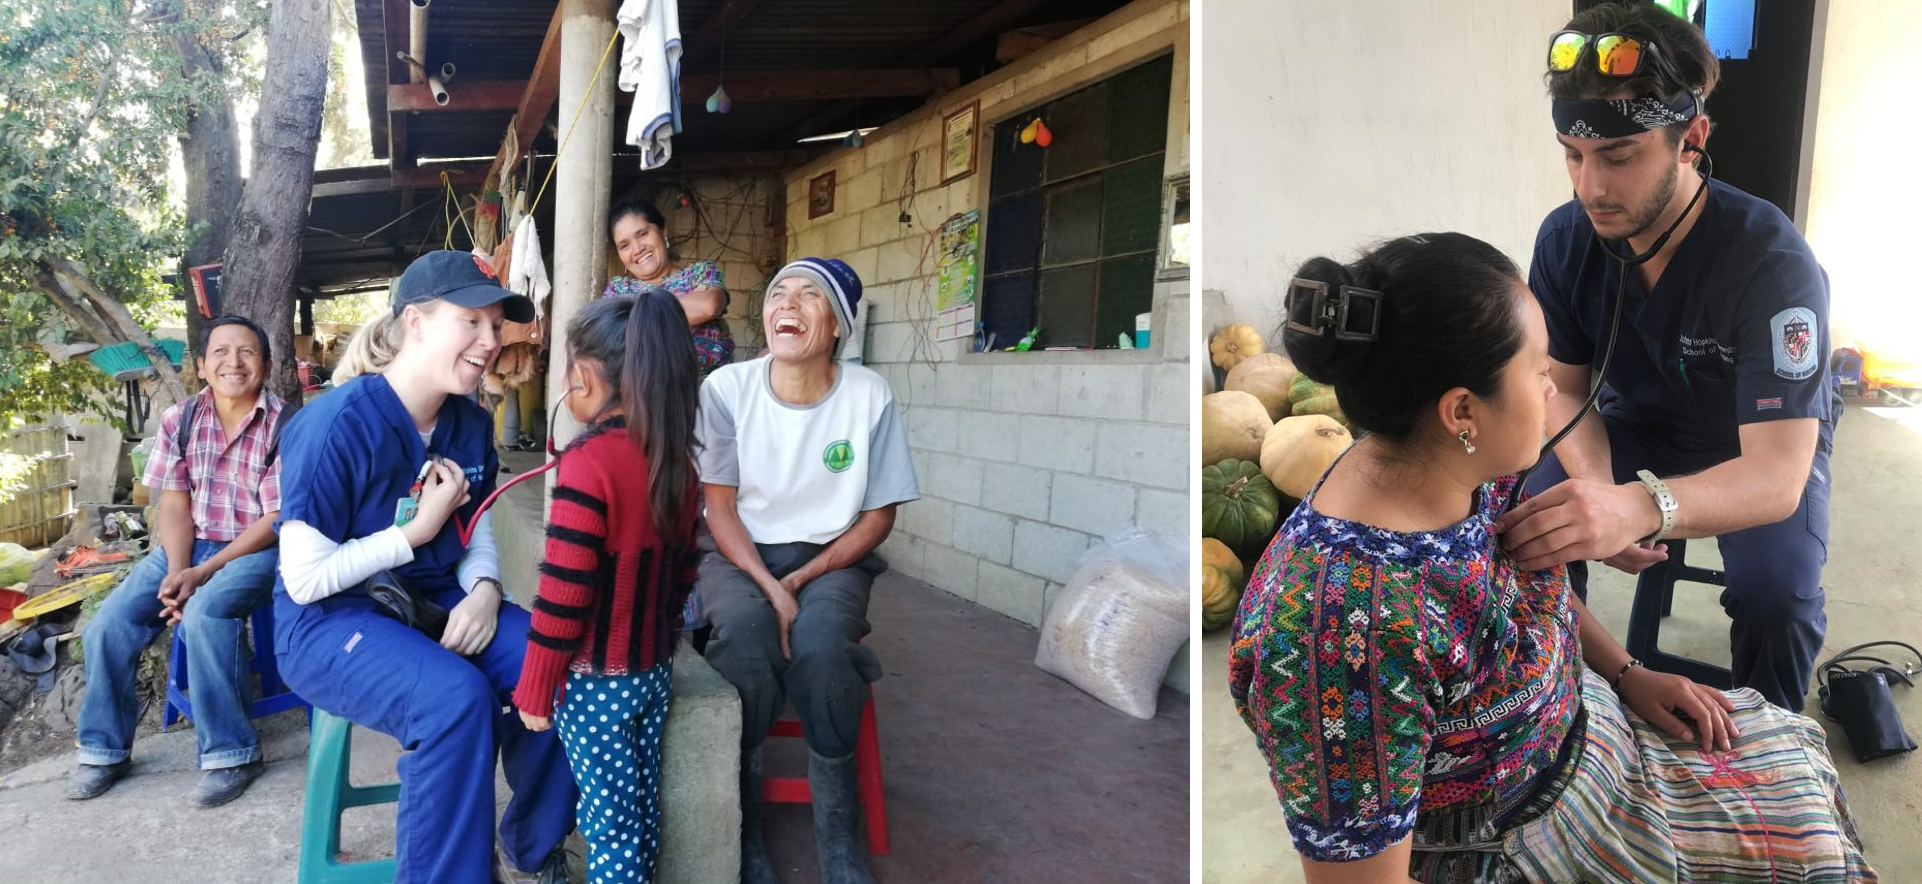 Guatemala Re-visited: Rainwater Project Shows Value of Service-learning Trips